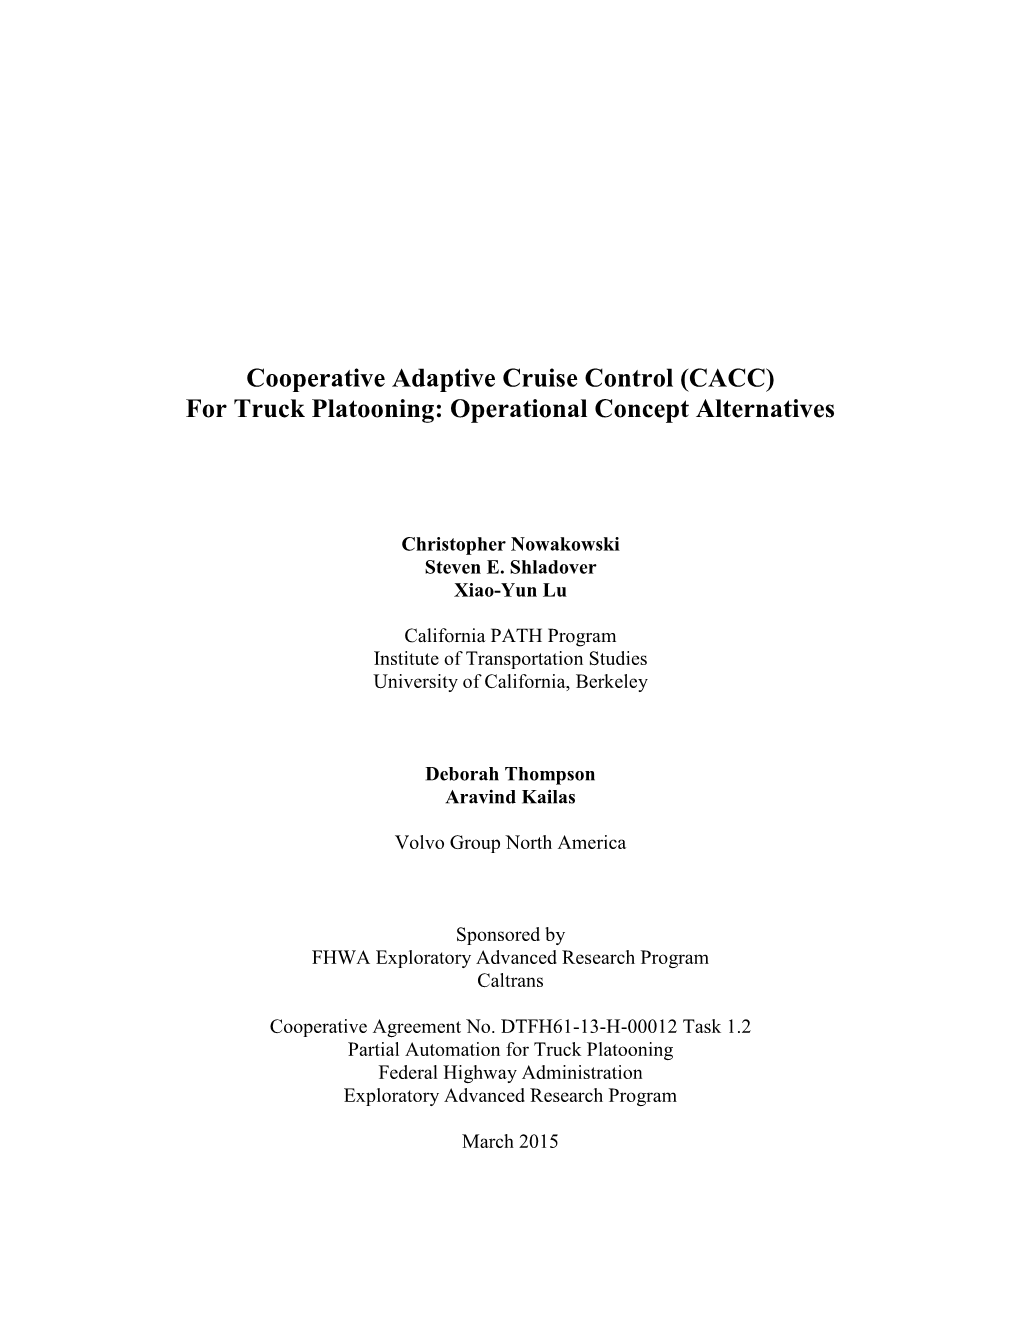 Cooperative Adaptive Cruise Control (CACC) for Truck Platooning: Operational Concept Alternatives